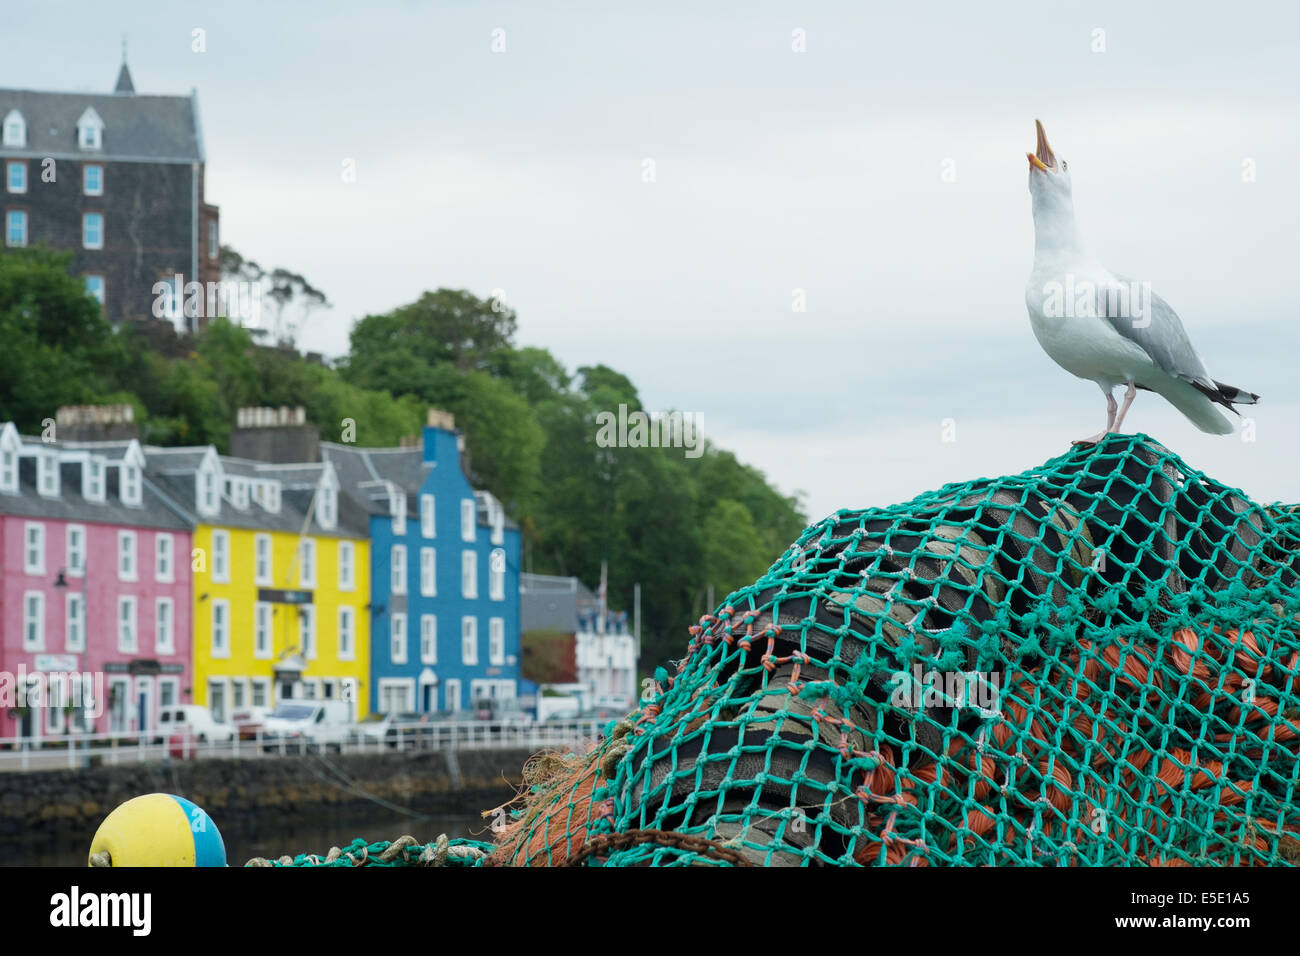 vocalSeagull calling, with fishing nets and brightly coloured houses, Tobermory, isle of Mull, Scottish Islands Stock Photo